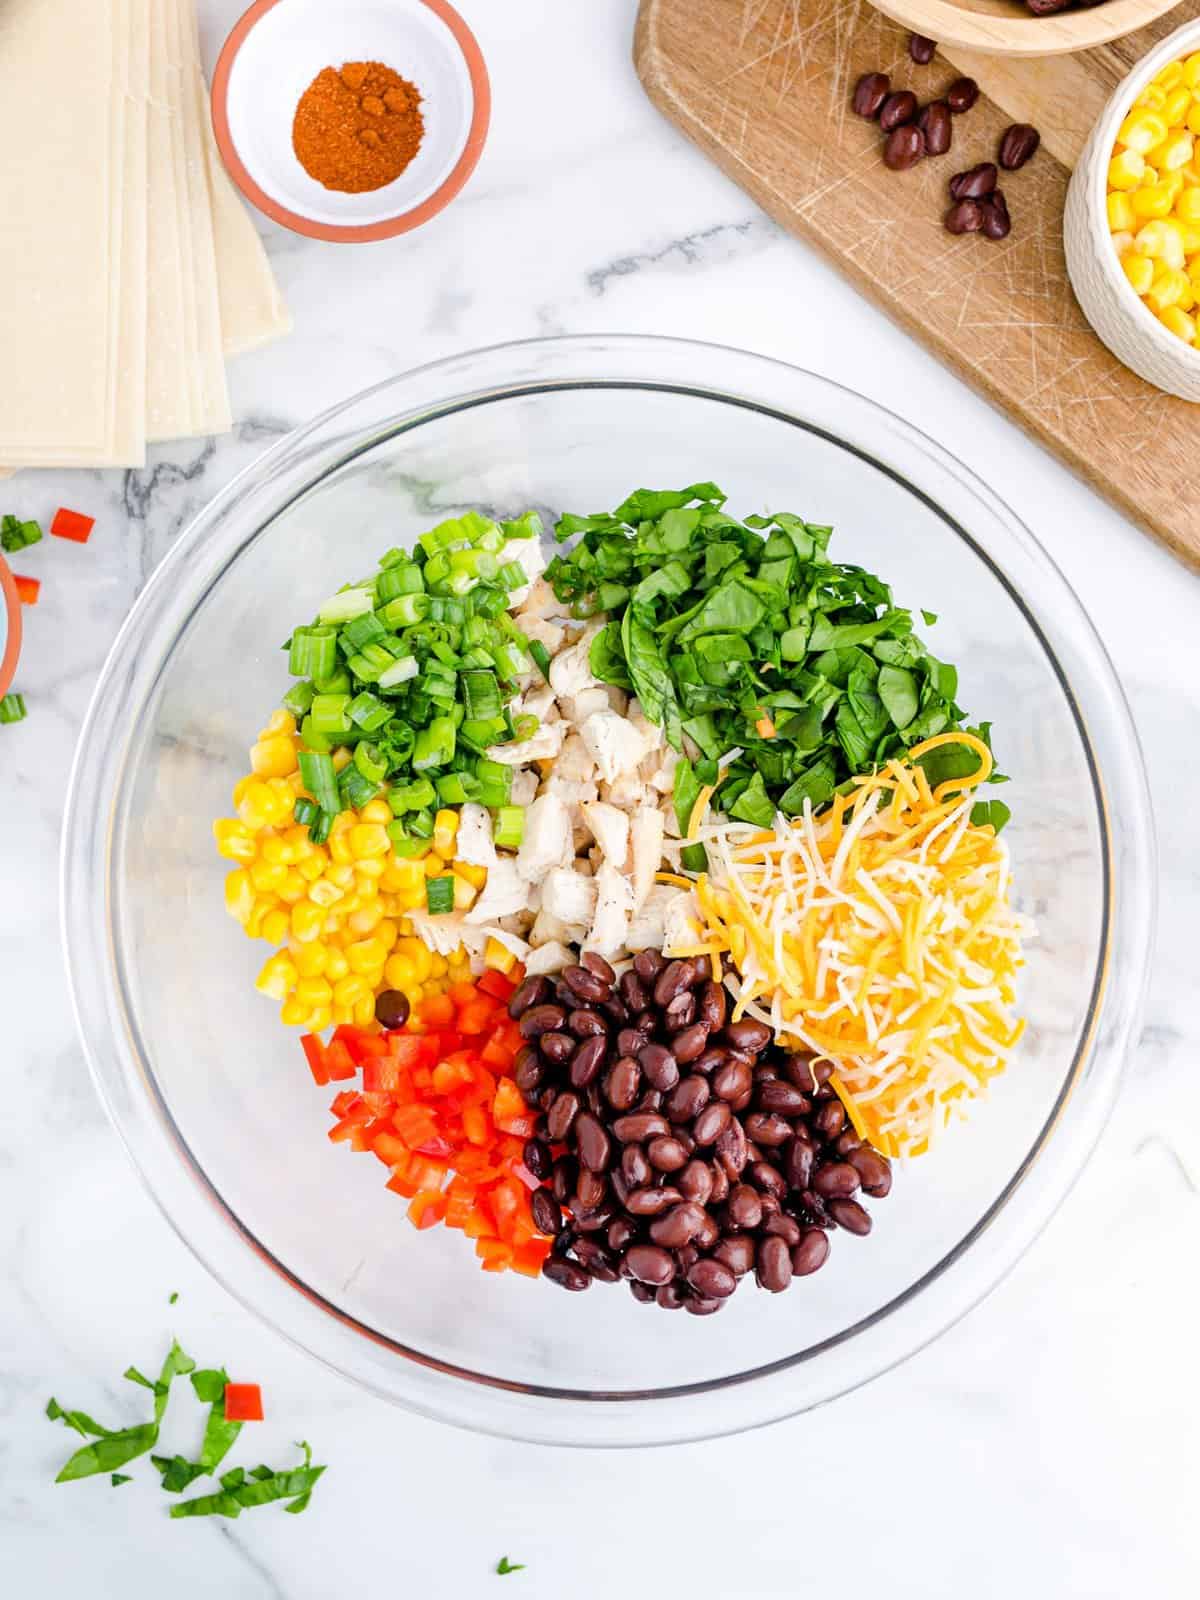 Chicken, corn, red bell pepper, sliced green onions, black beans, chopped spinach, Mexican blend cheese in a glass bowl.